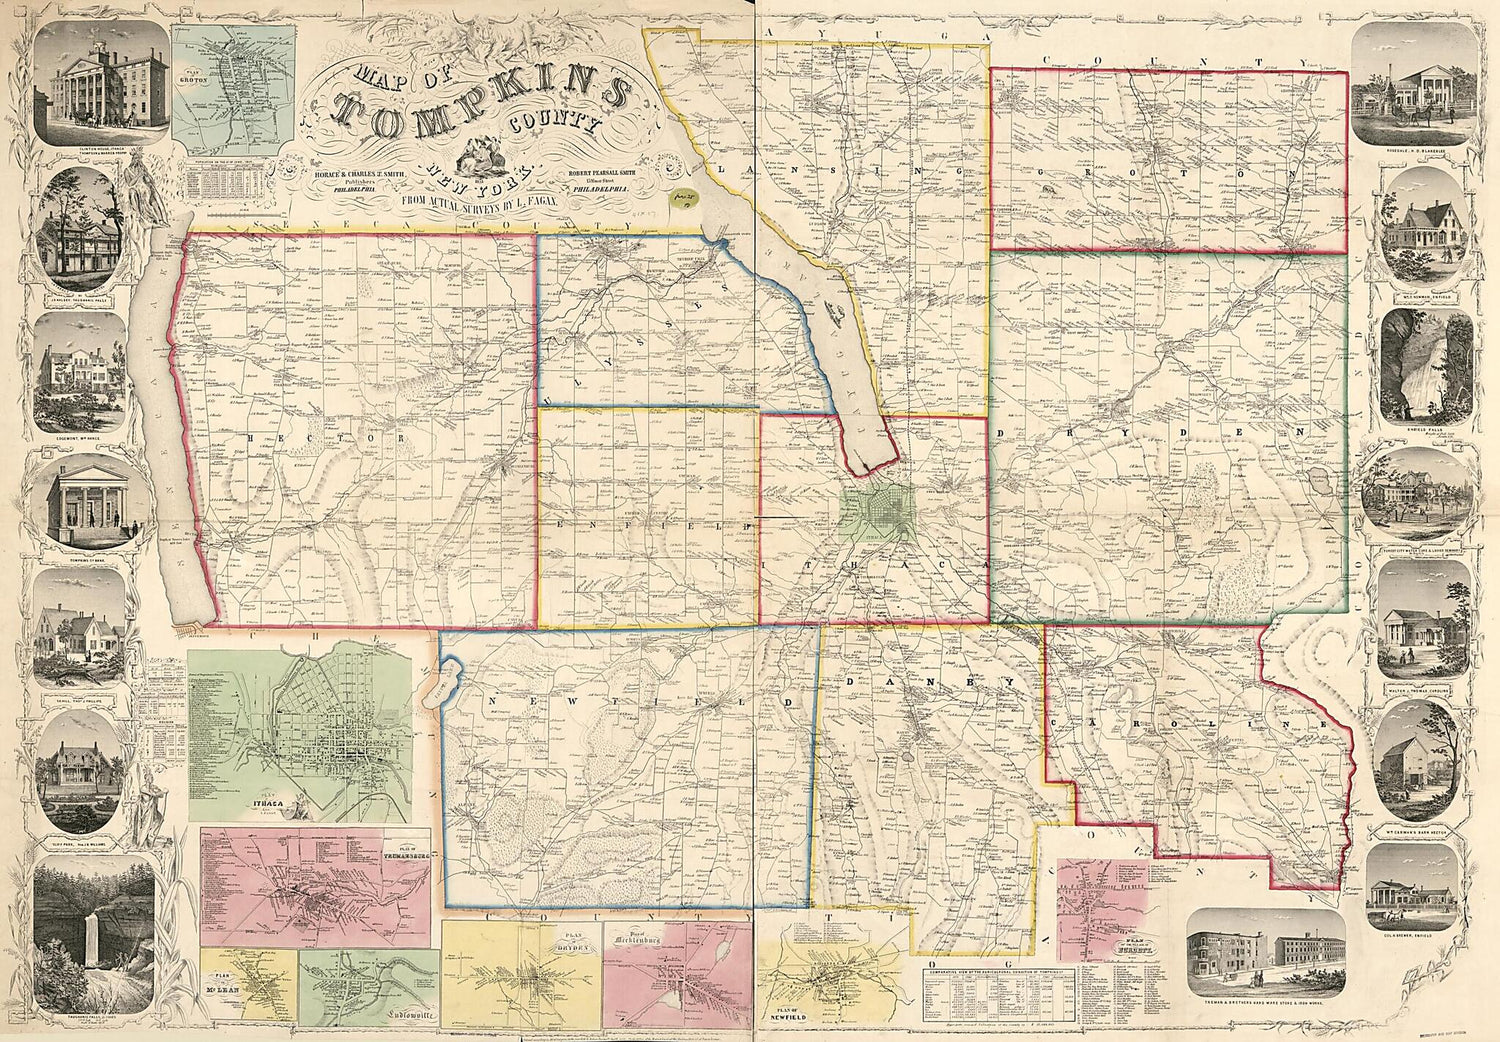 This old map of Map of Tompkins County, New York : from Actual Surveys from 1853 was created by L. Fagan, Robert Pearsall Smith in 1853